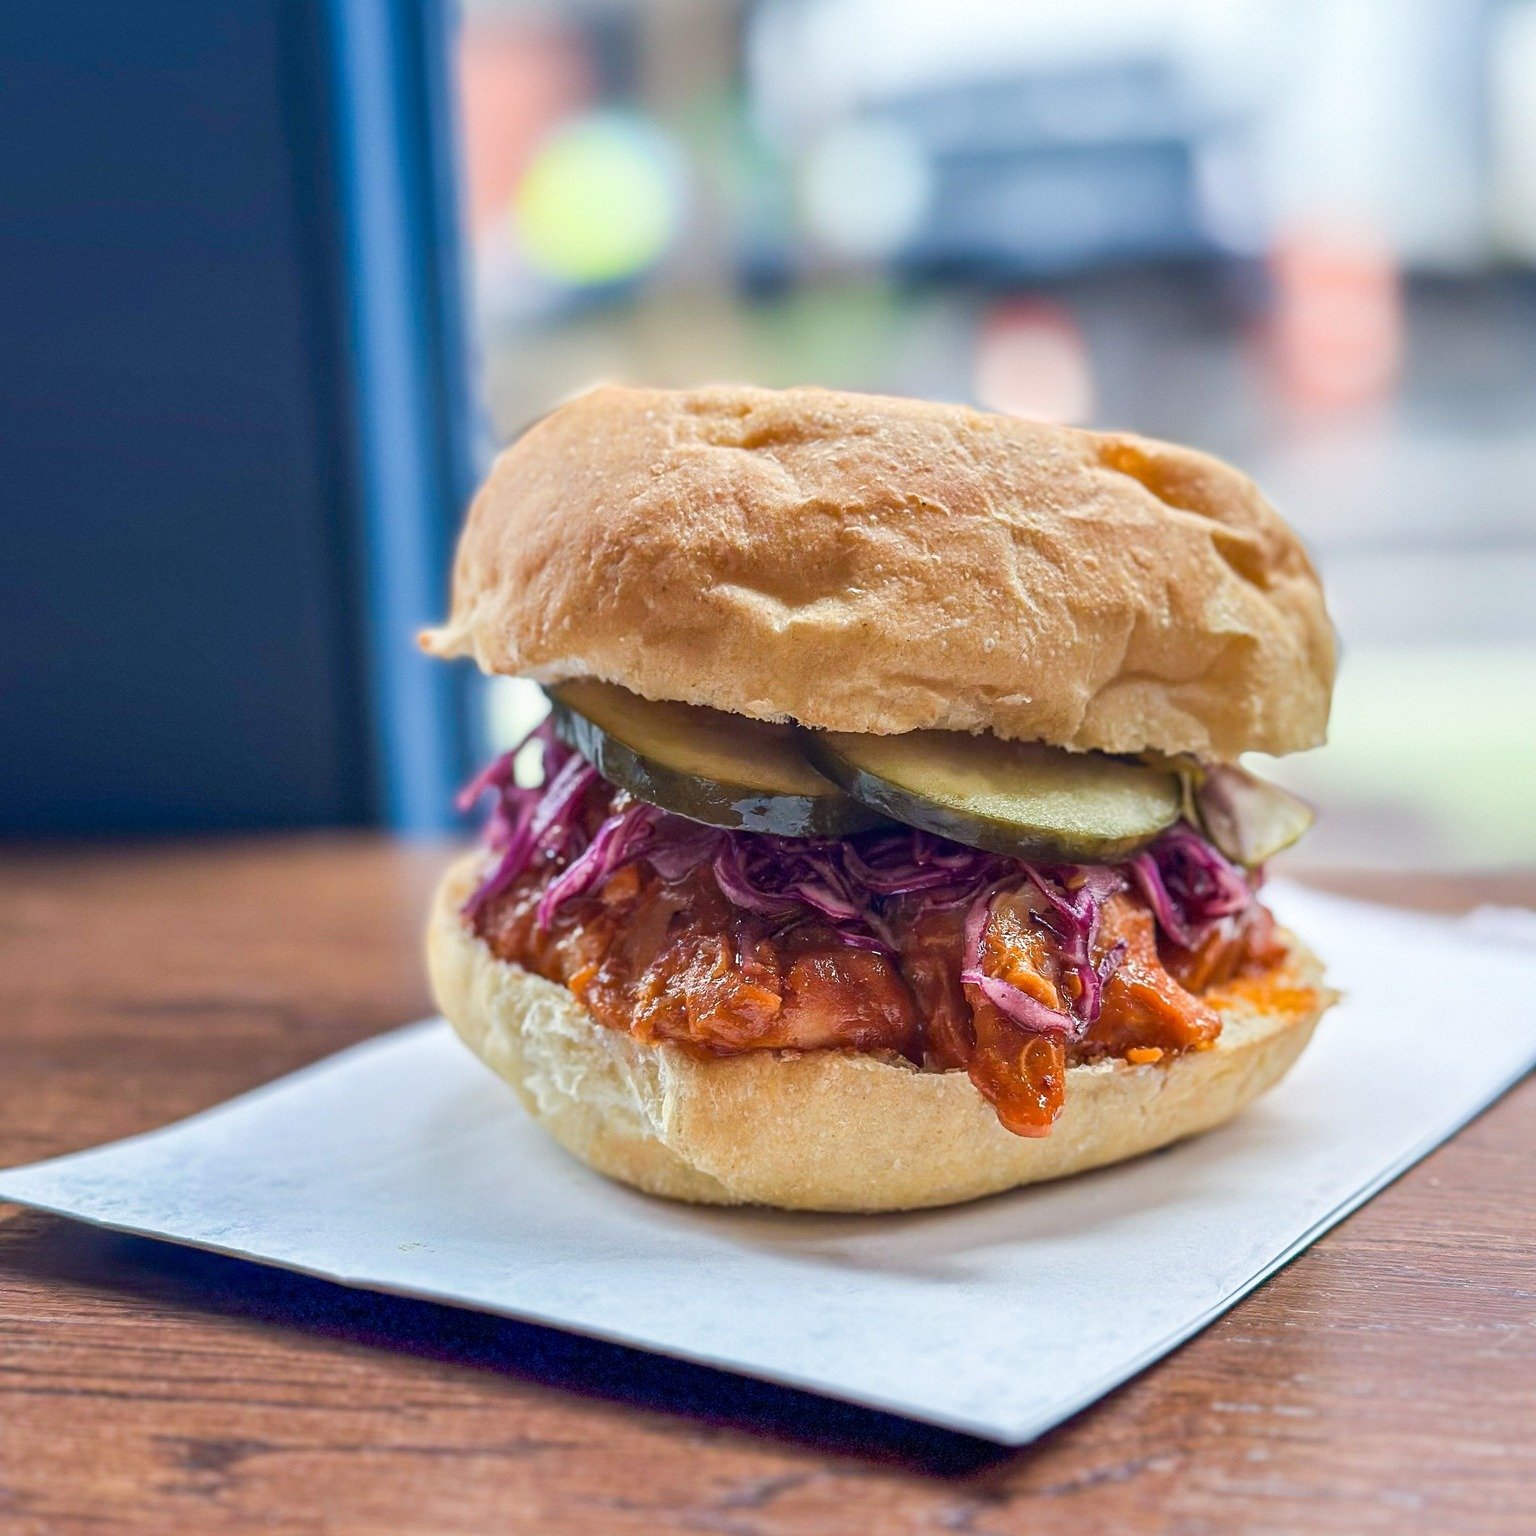 🚨 new 🔥 special alert 🚨 introducing the Ros&eacute; BBQ Chicken Sandwich, just in time for picnic season. featuring pickle-brined pulled chicken, tangy ros&eacute; bbq sauce, red cabbage slaw &amp; dill pickle slices on our house-made fresh kaiser